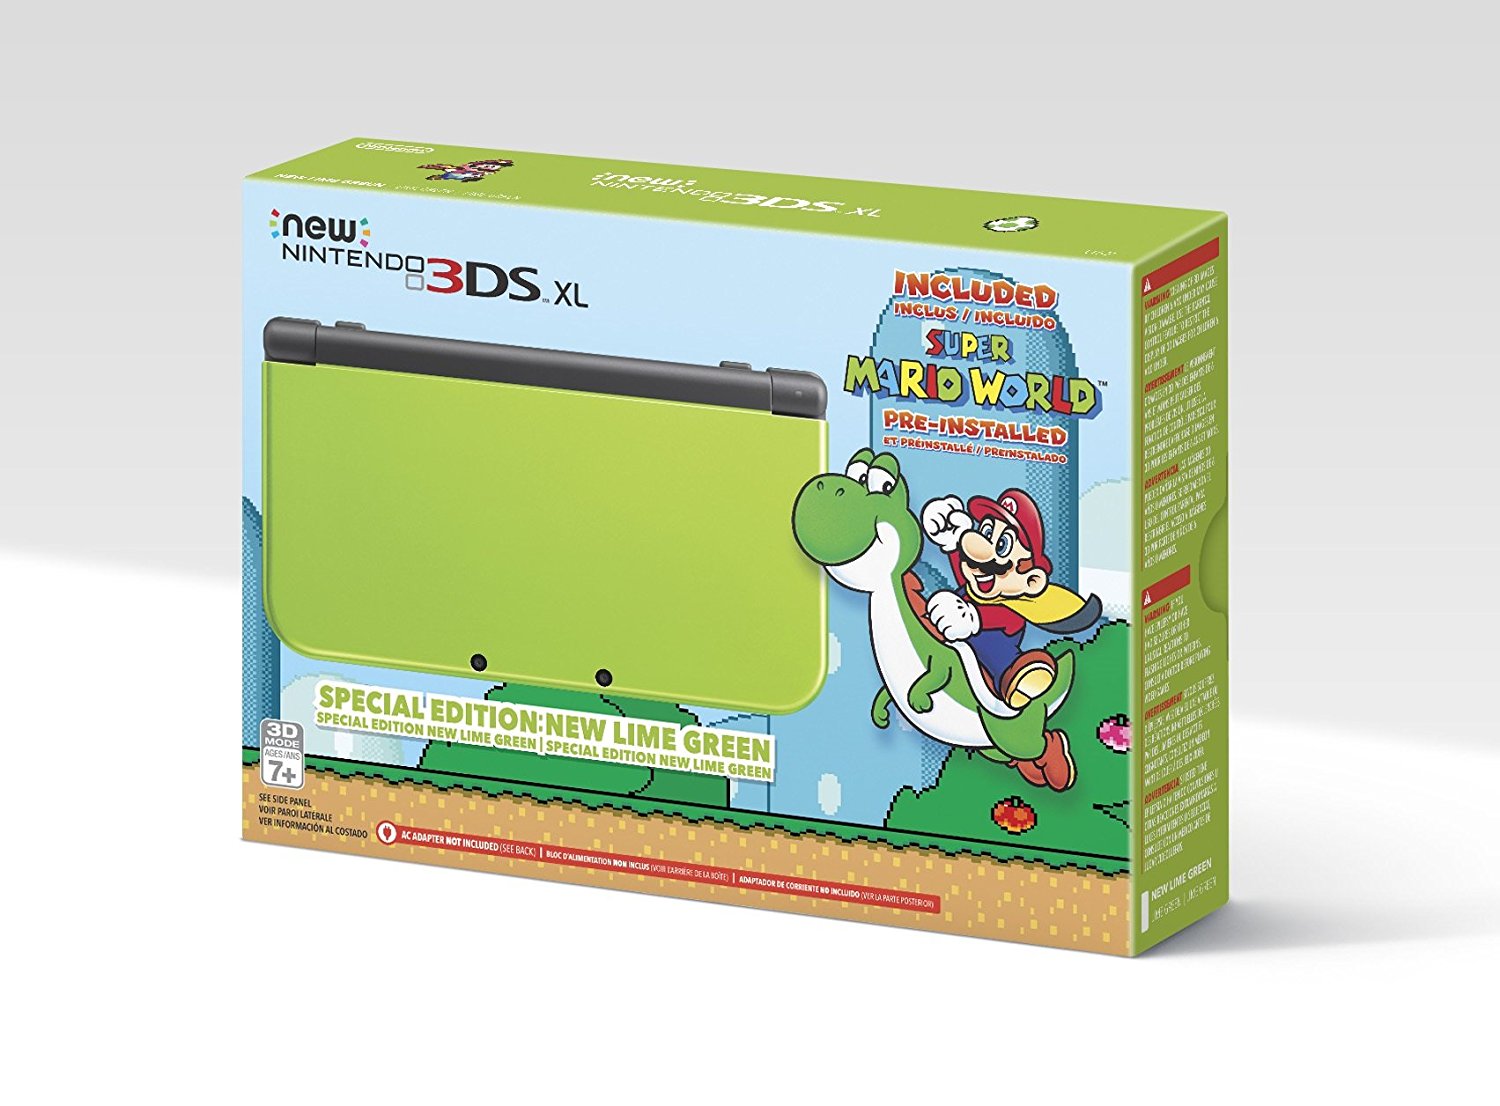 lime-green-new-nintendo-3ds-xl-hardware-image